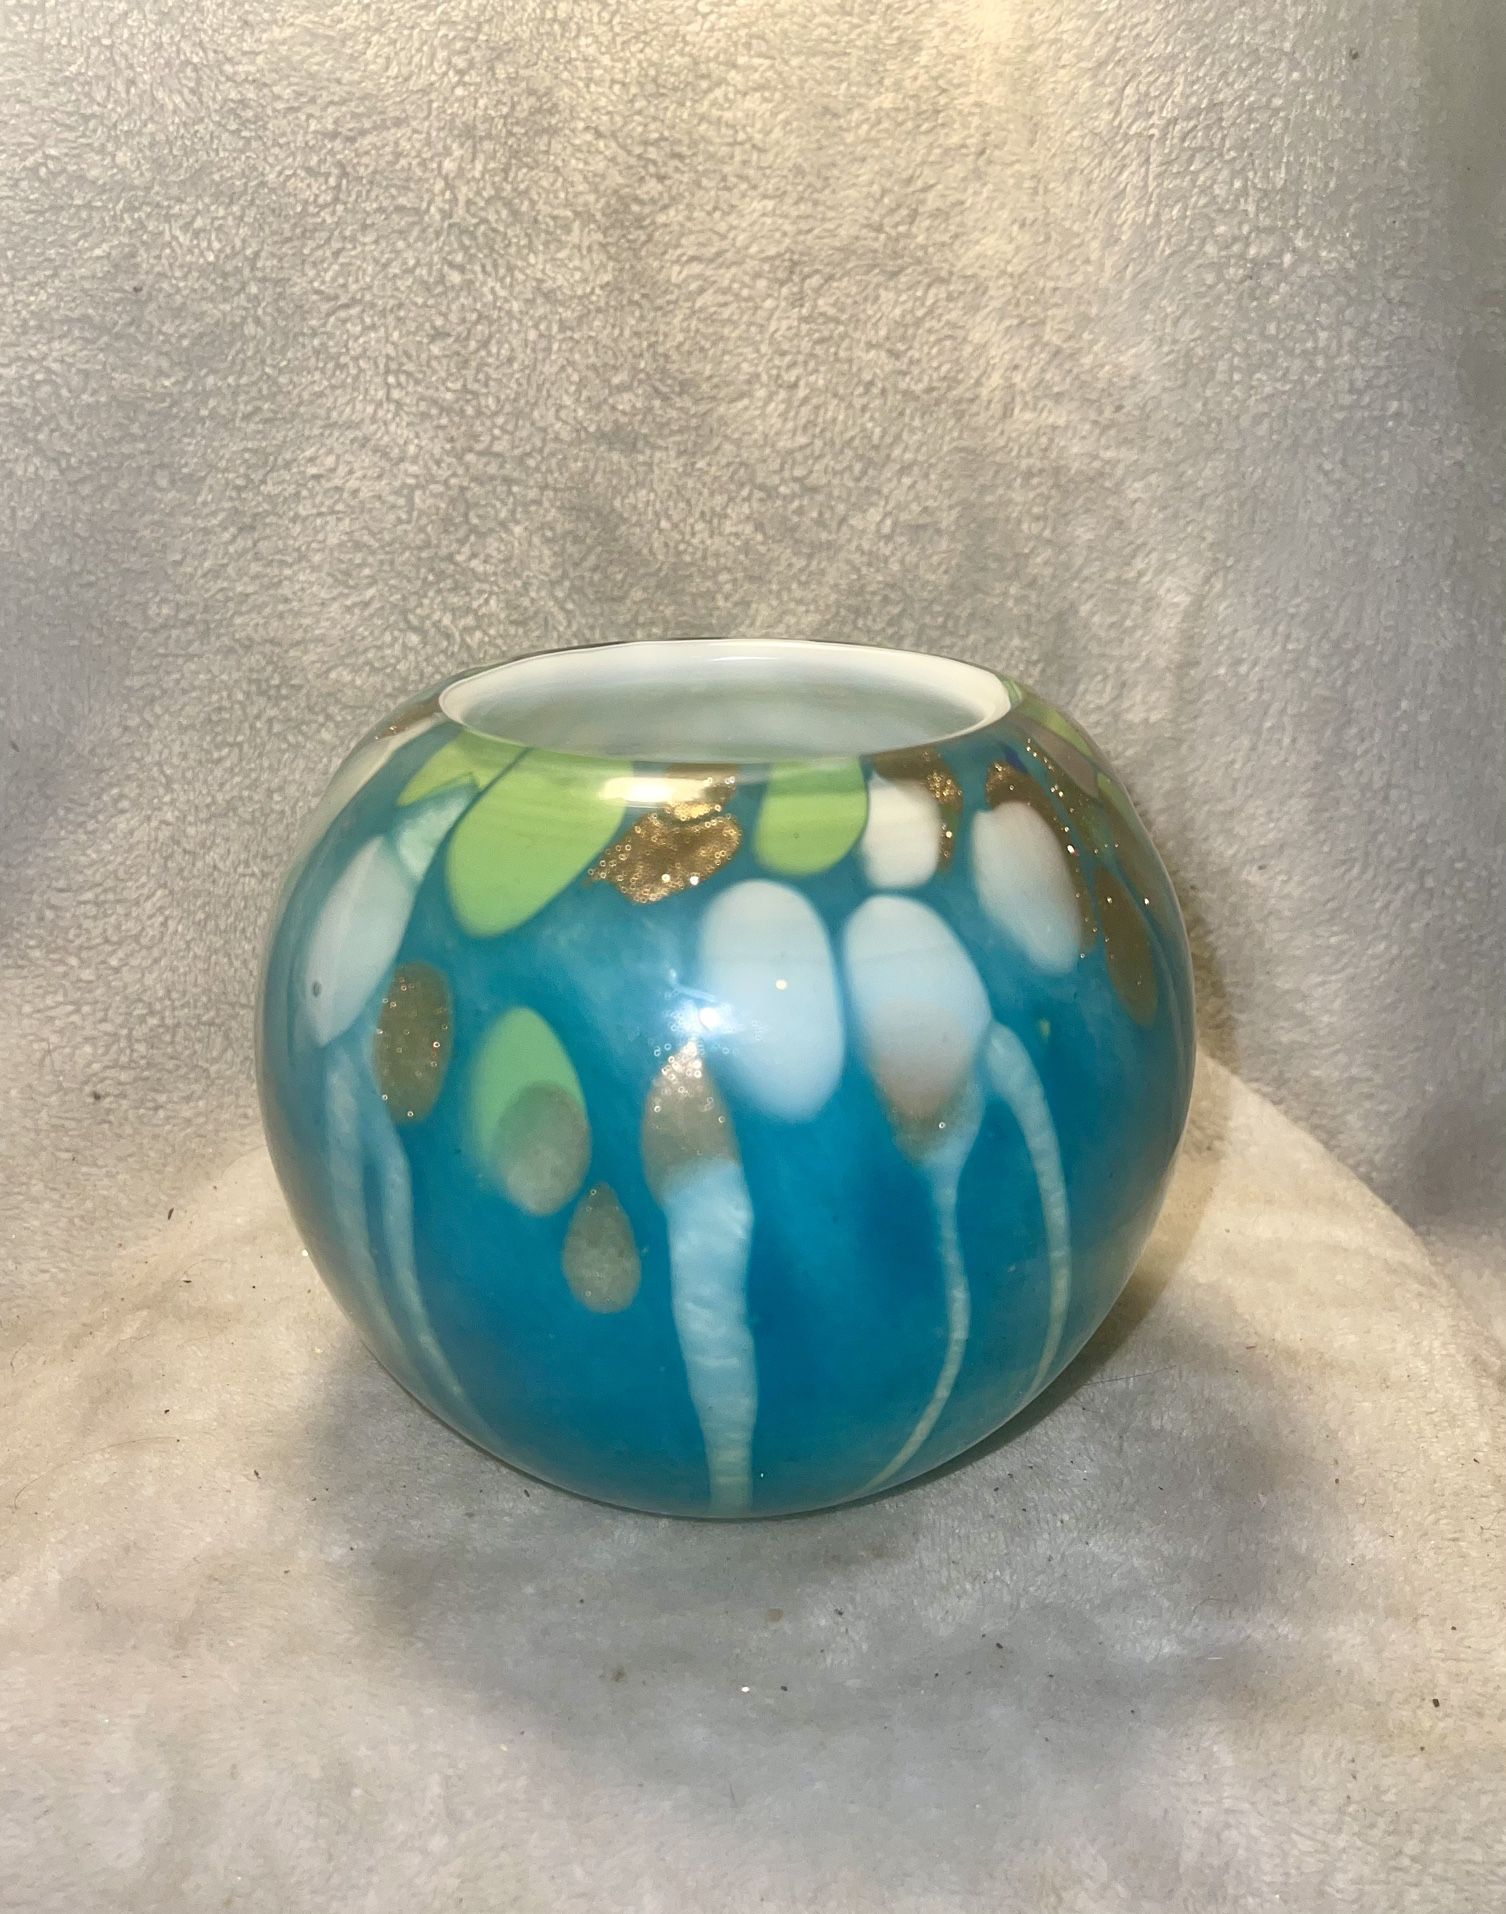 Art glass double walled turquoise Vase or candle holder. Vase has copper sparkles in the glass. 